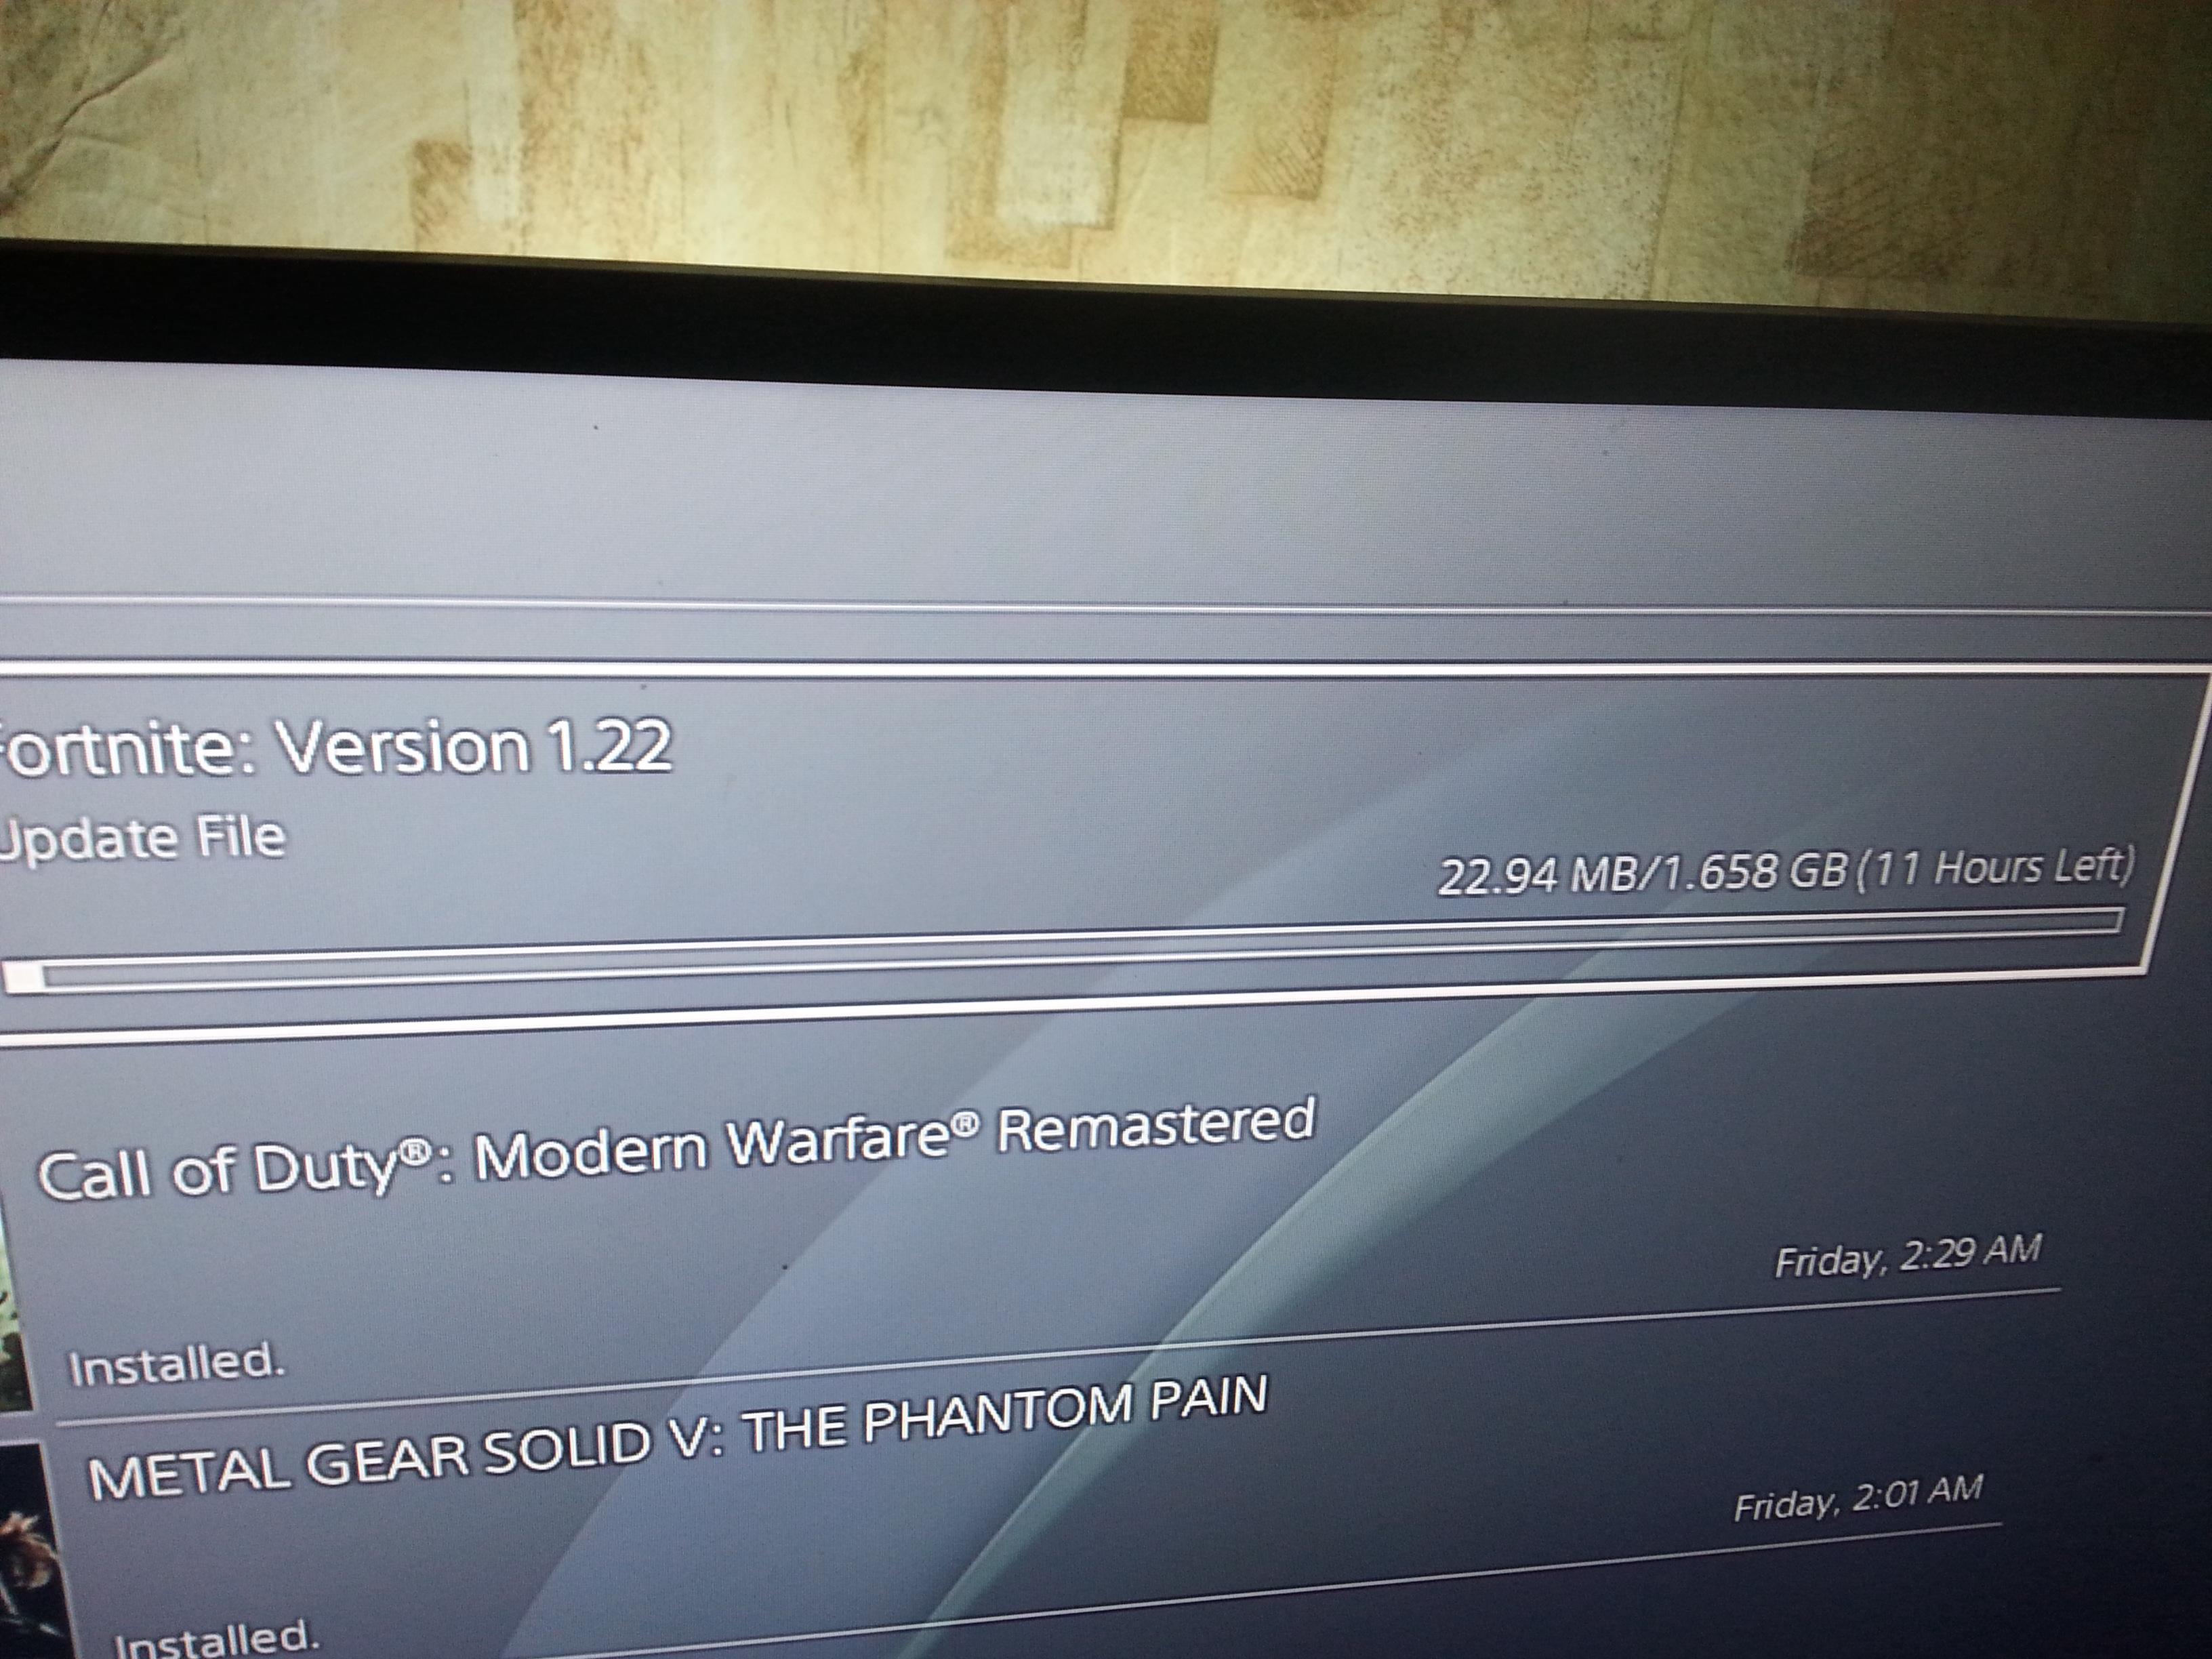 Slow Ps4 Download Speed